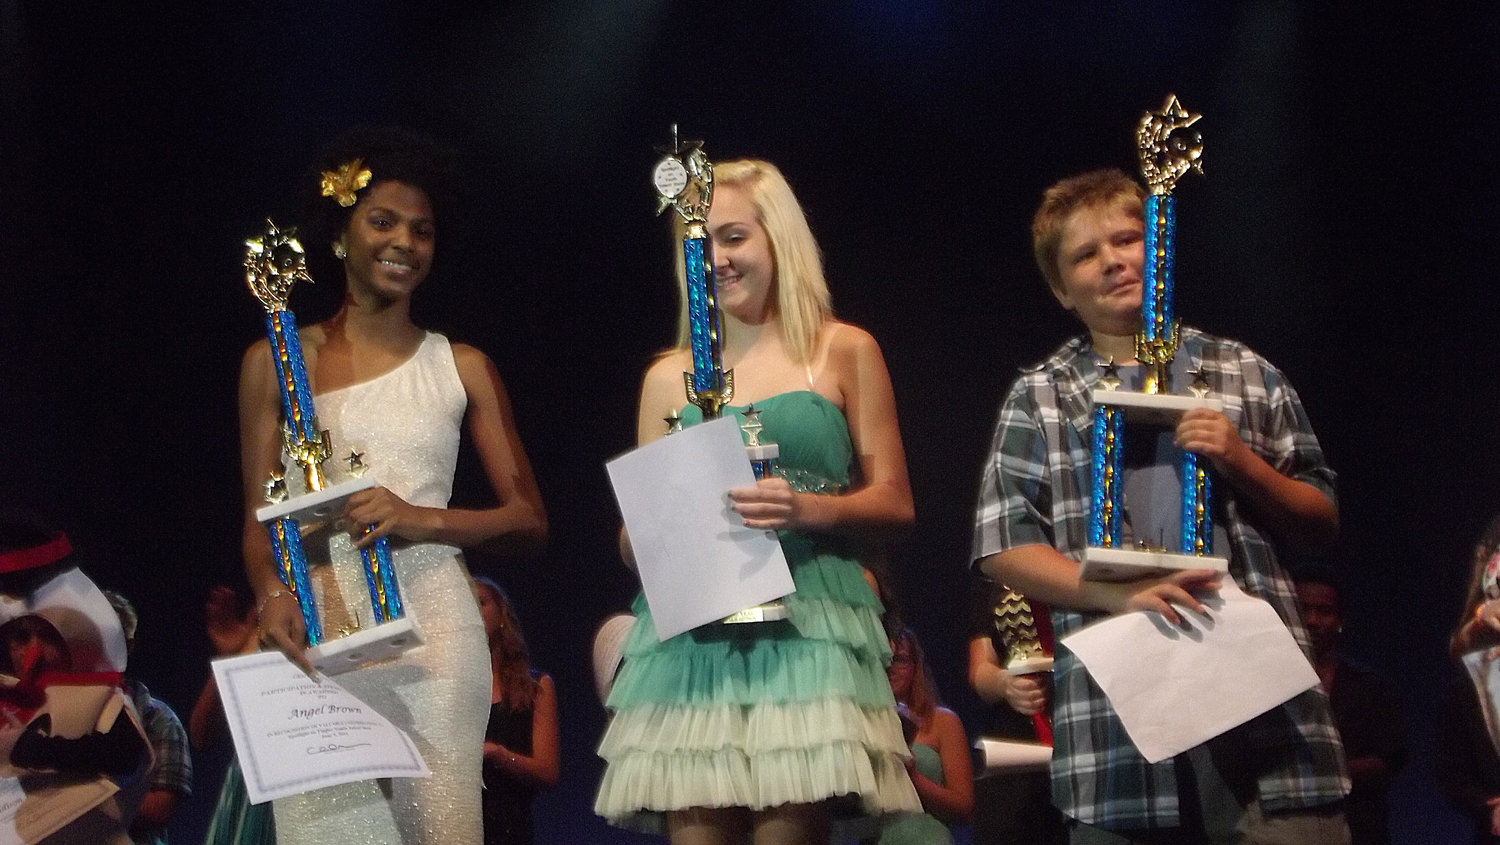 Your 2014 Flagler County Entertainers of the Year. From left, enior Division: Angel Brown (MHS), Middle School Division: Kayla Byrne (ITMS), and Elementary Division: Skyler Wahl (Home Schooled). Click on the image for larger view. (Cheryl Massaro)